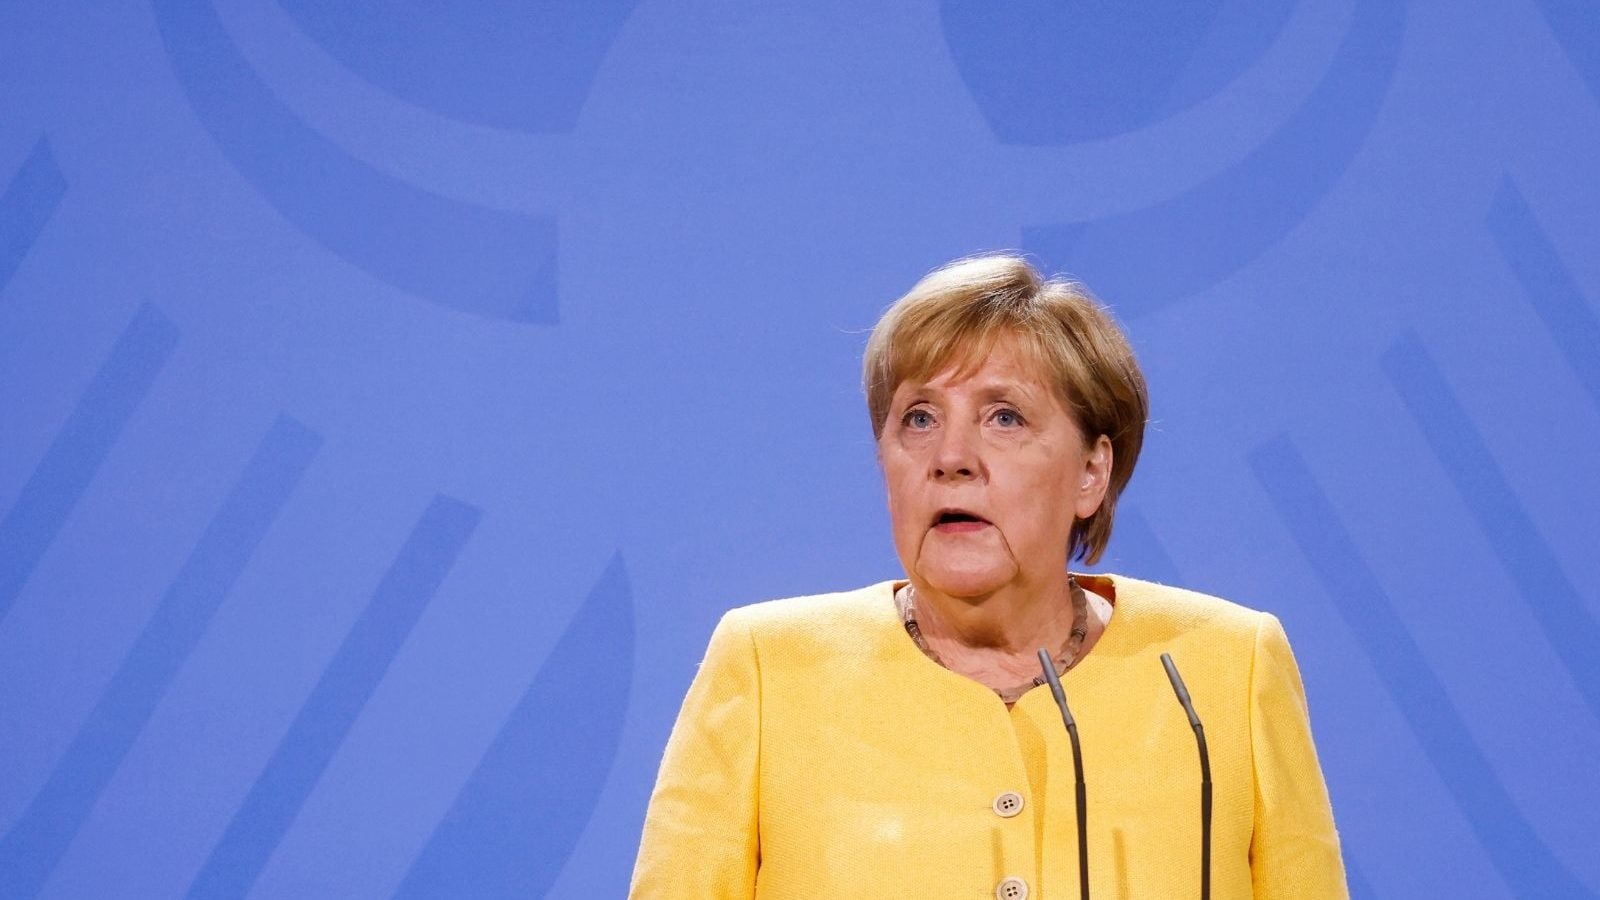 Scientist Who Became A World Leader A Look At Angela Merkel S Journey In Pictures News18